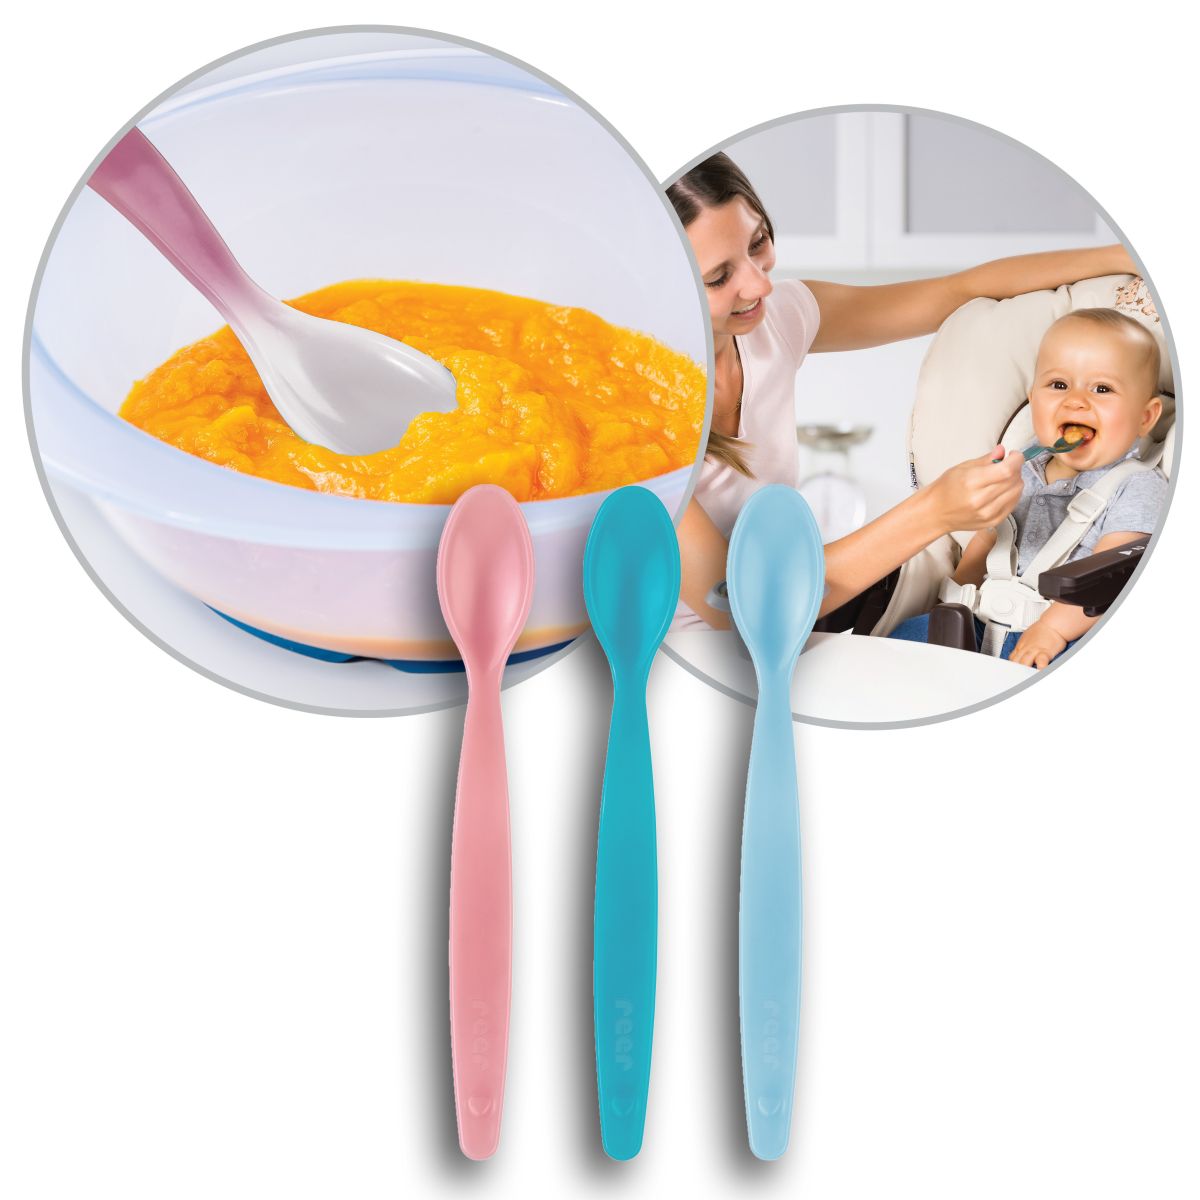 MagicSpoon baby spoon with temperature indication